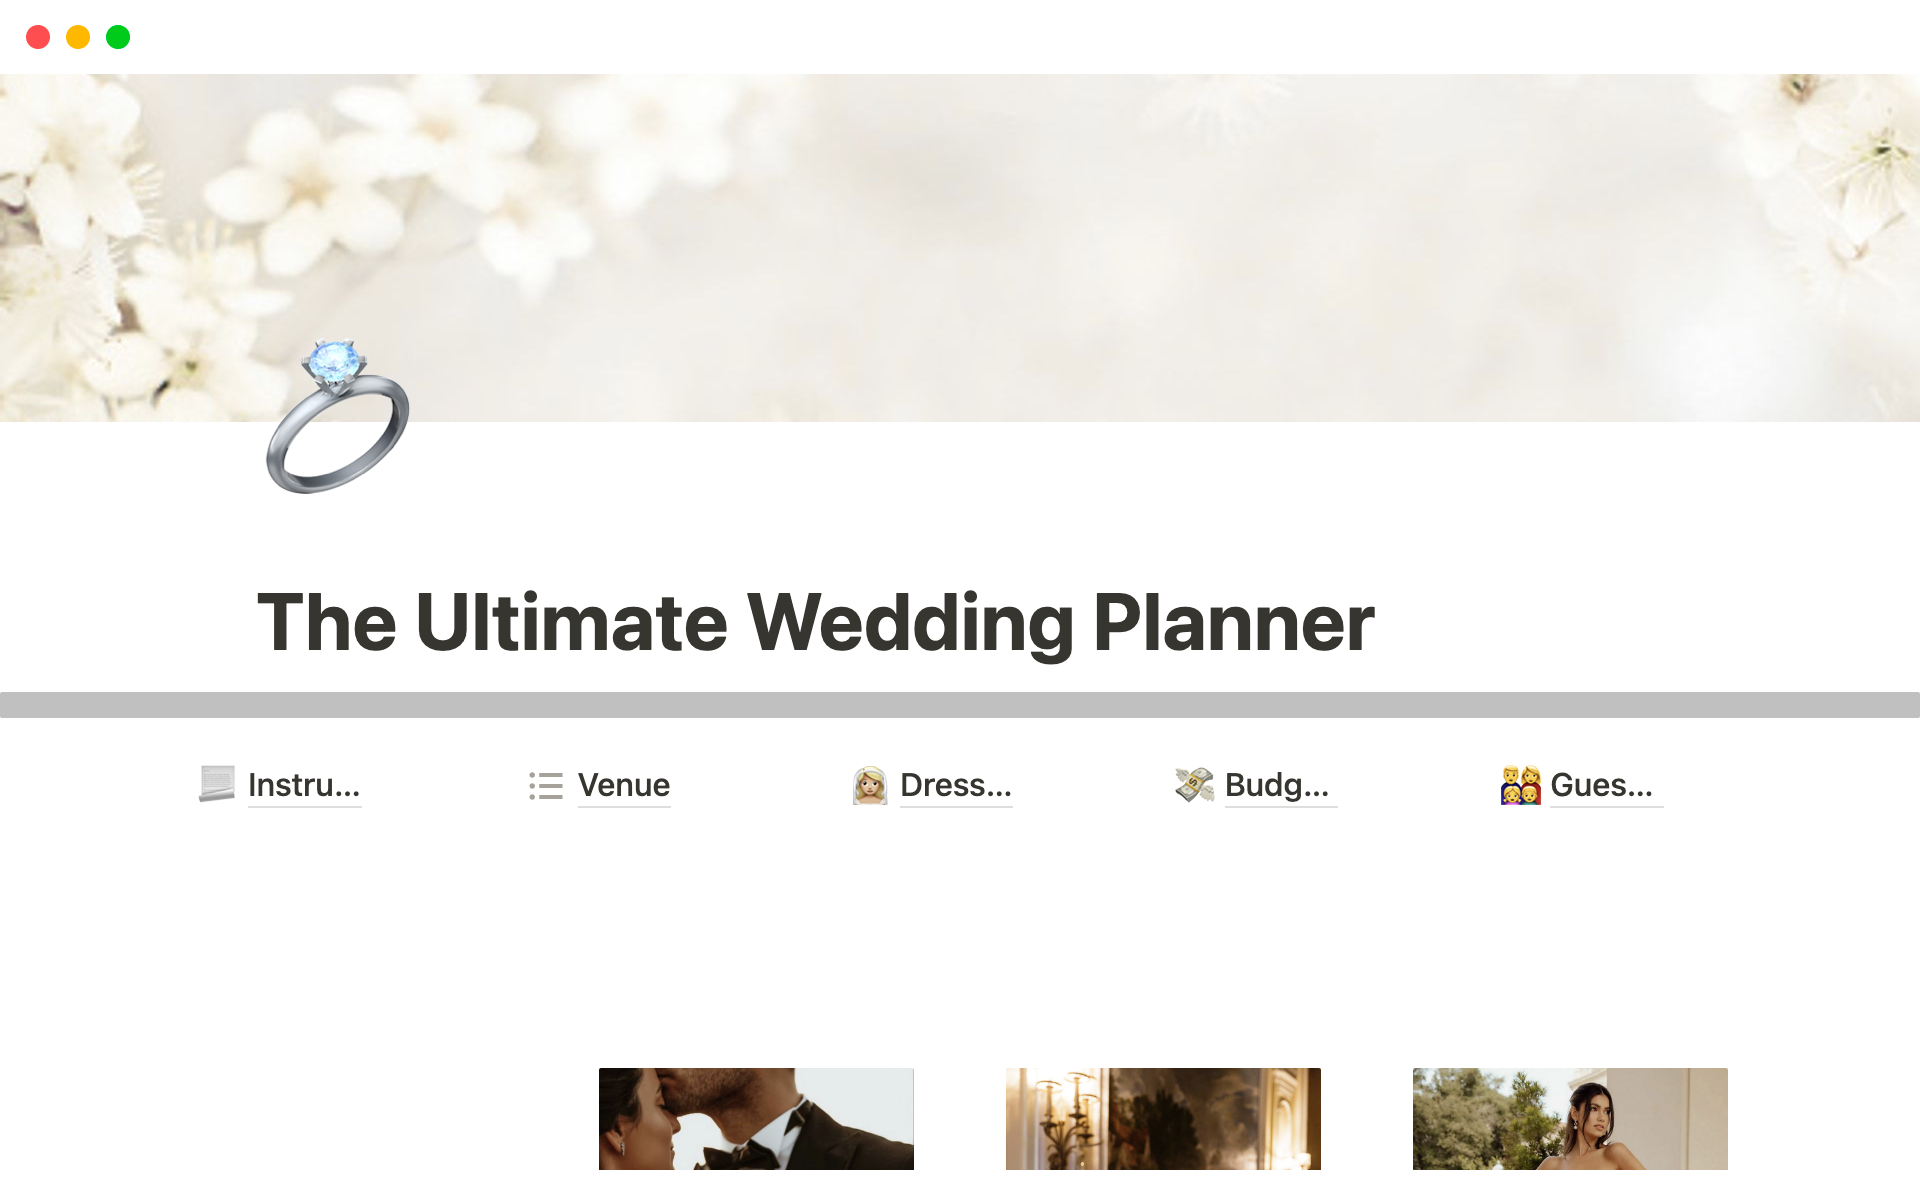 Introducing the ultimate wedding planning tool - our Notion wedding planner! From guest lists and catering to vendor management and budgeting, this planner has everything you need to plan your dream wedding.